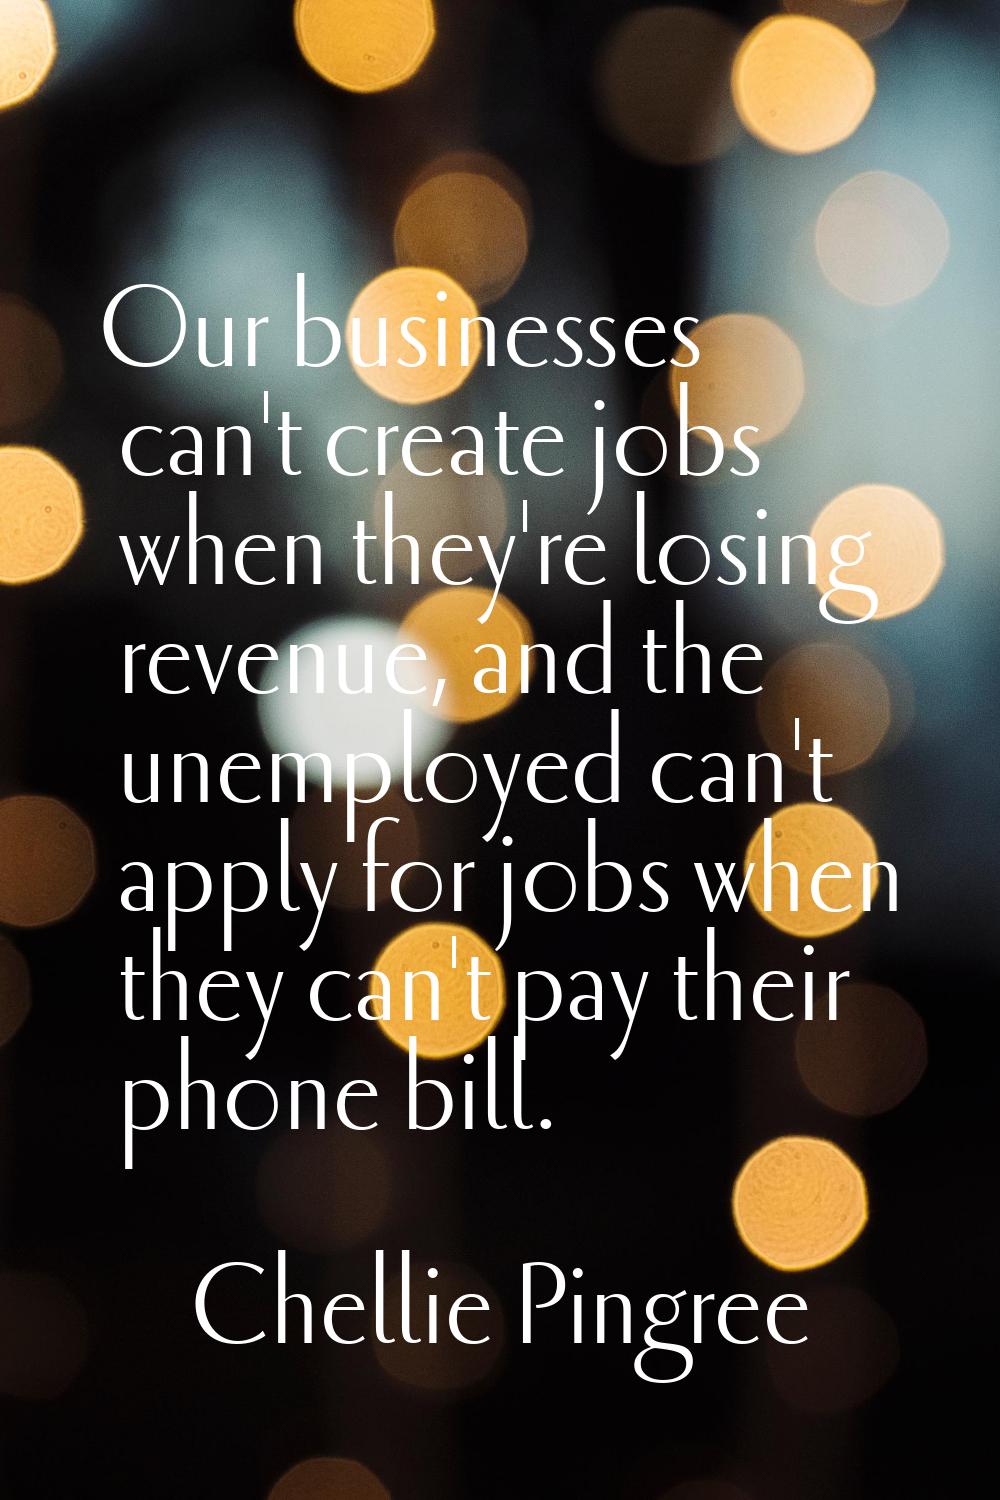 Our businesses can't create jobs when they're losing revenue, and the unemployed can't apply for jo